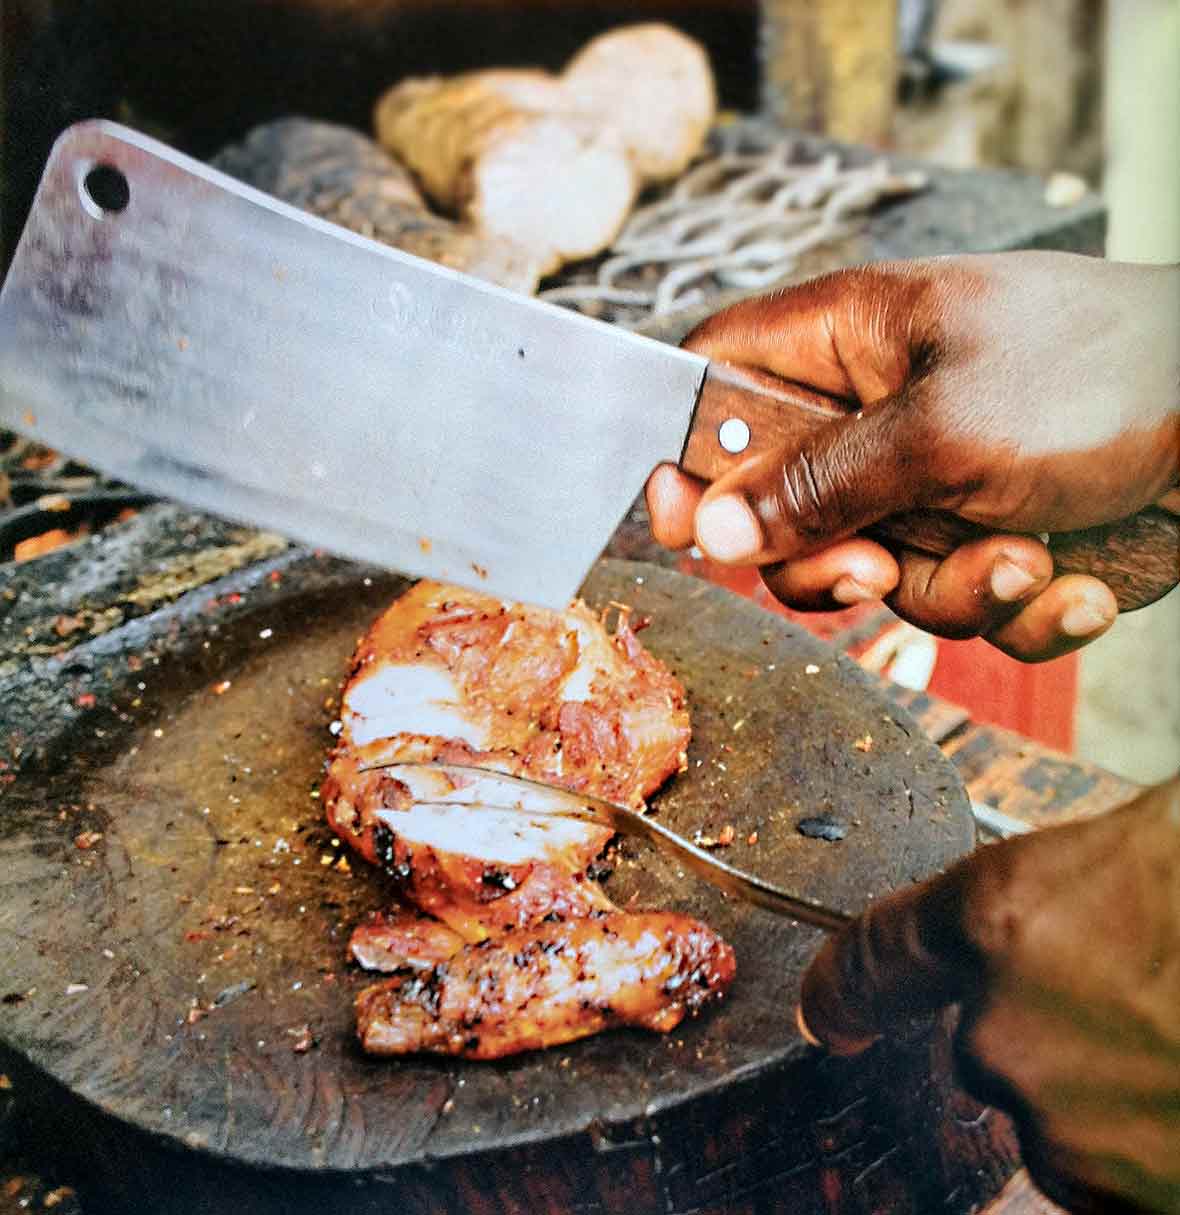 A sliced jerk chicken breast on a round cutting board, with a man's hand holding a cleaver above it